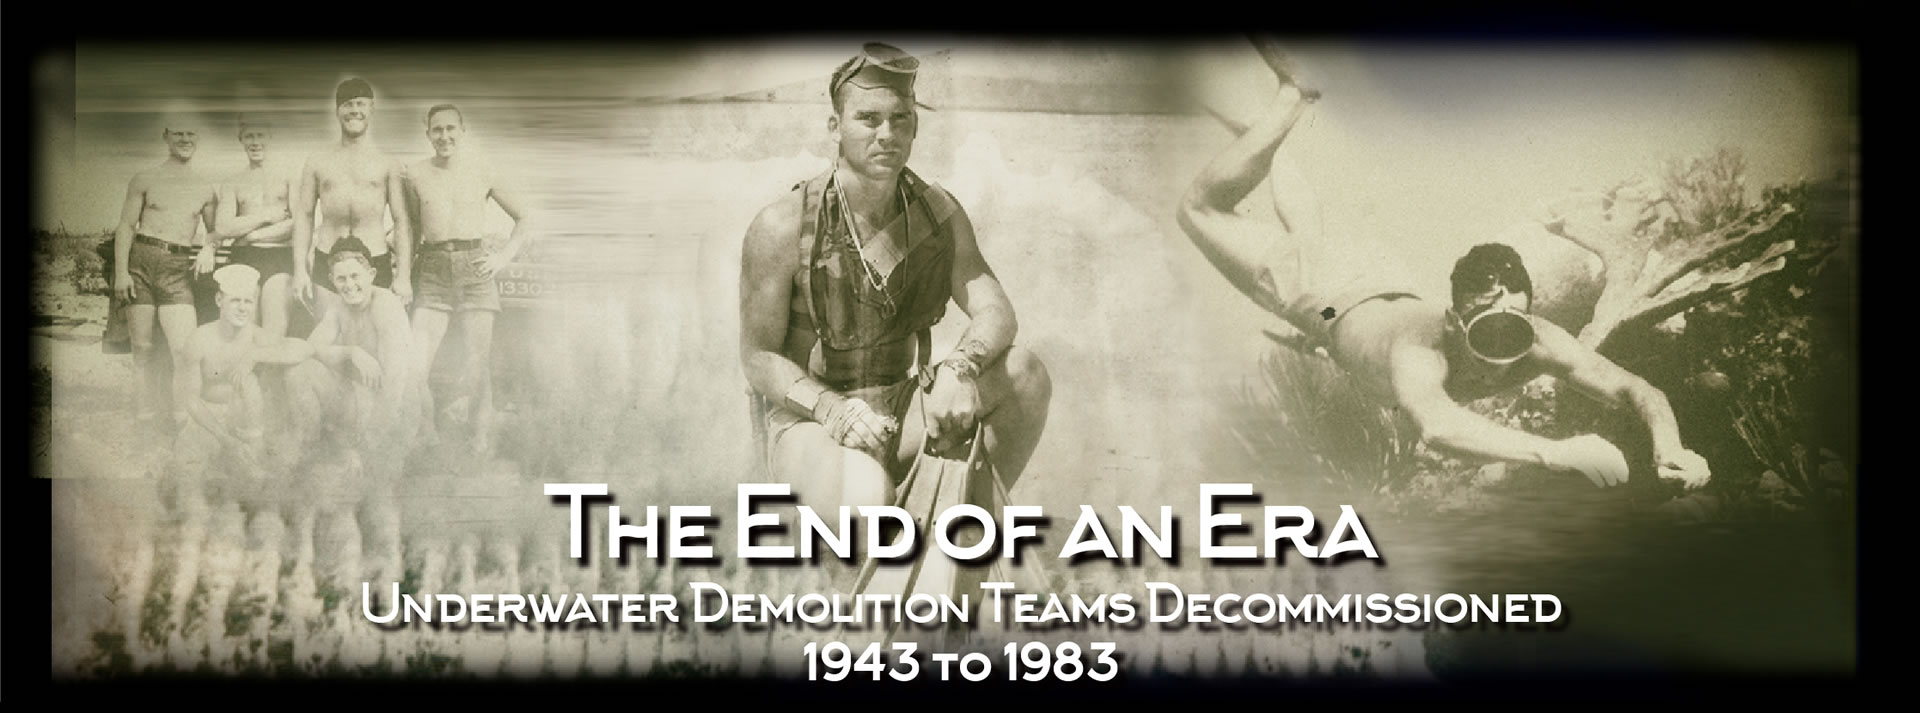 The End of an Era | Underwater Demolition Teams Decommissioned (1943-1983)